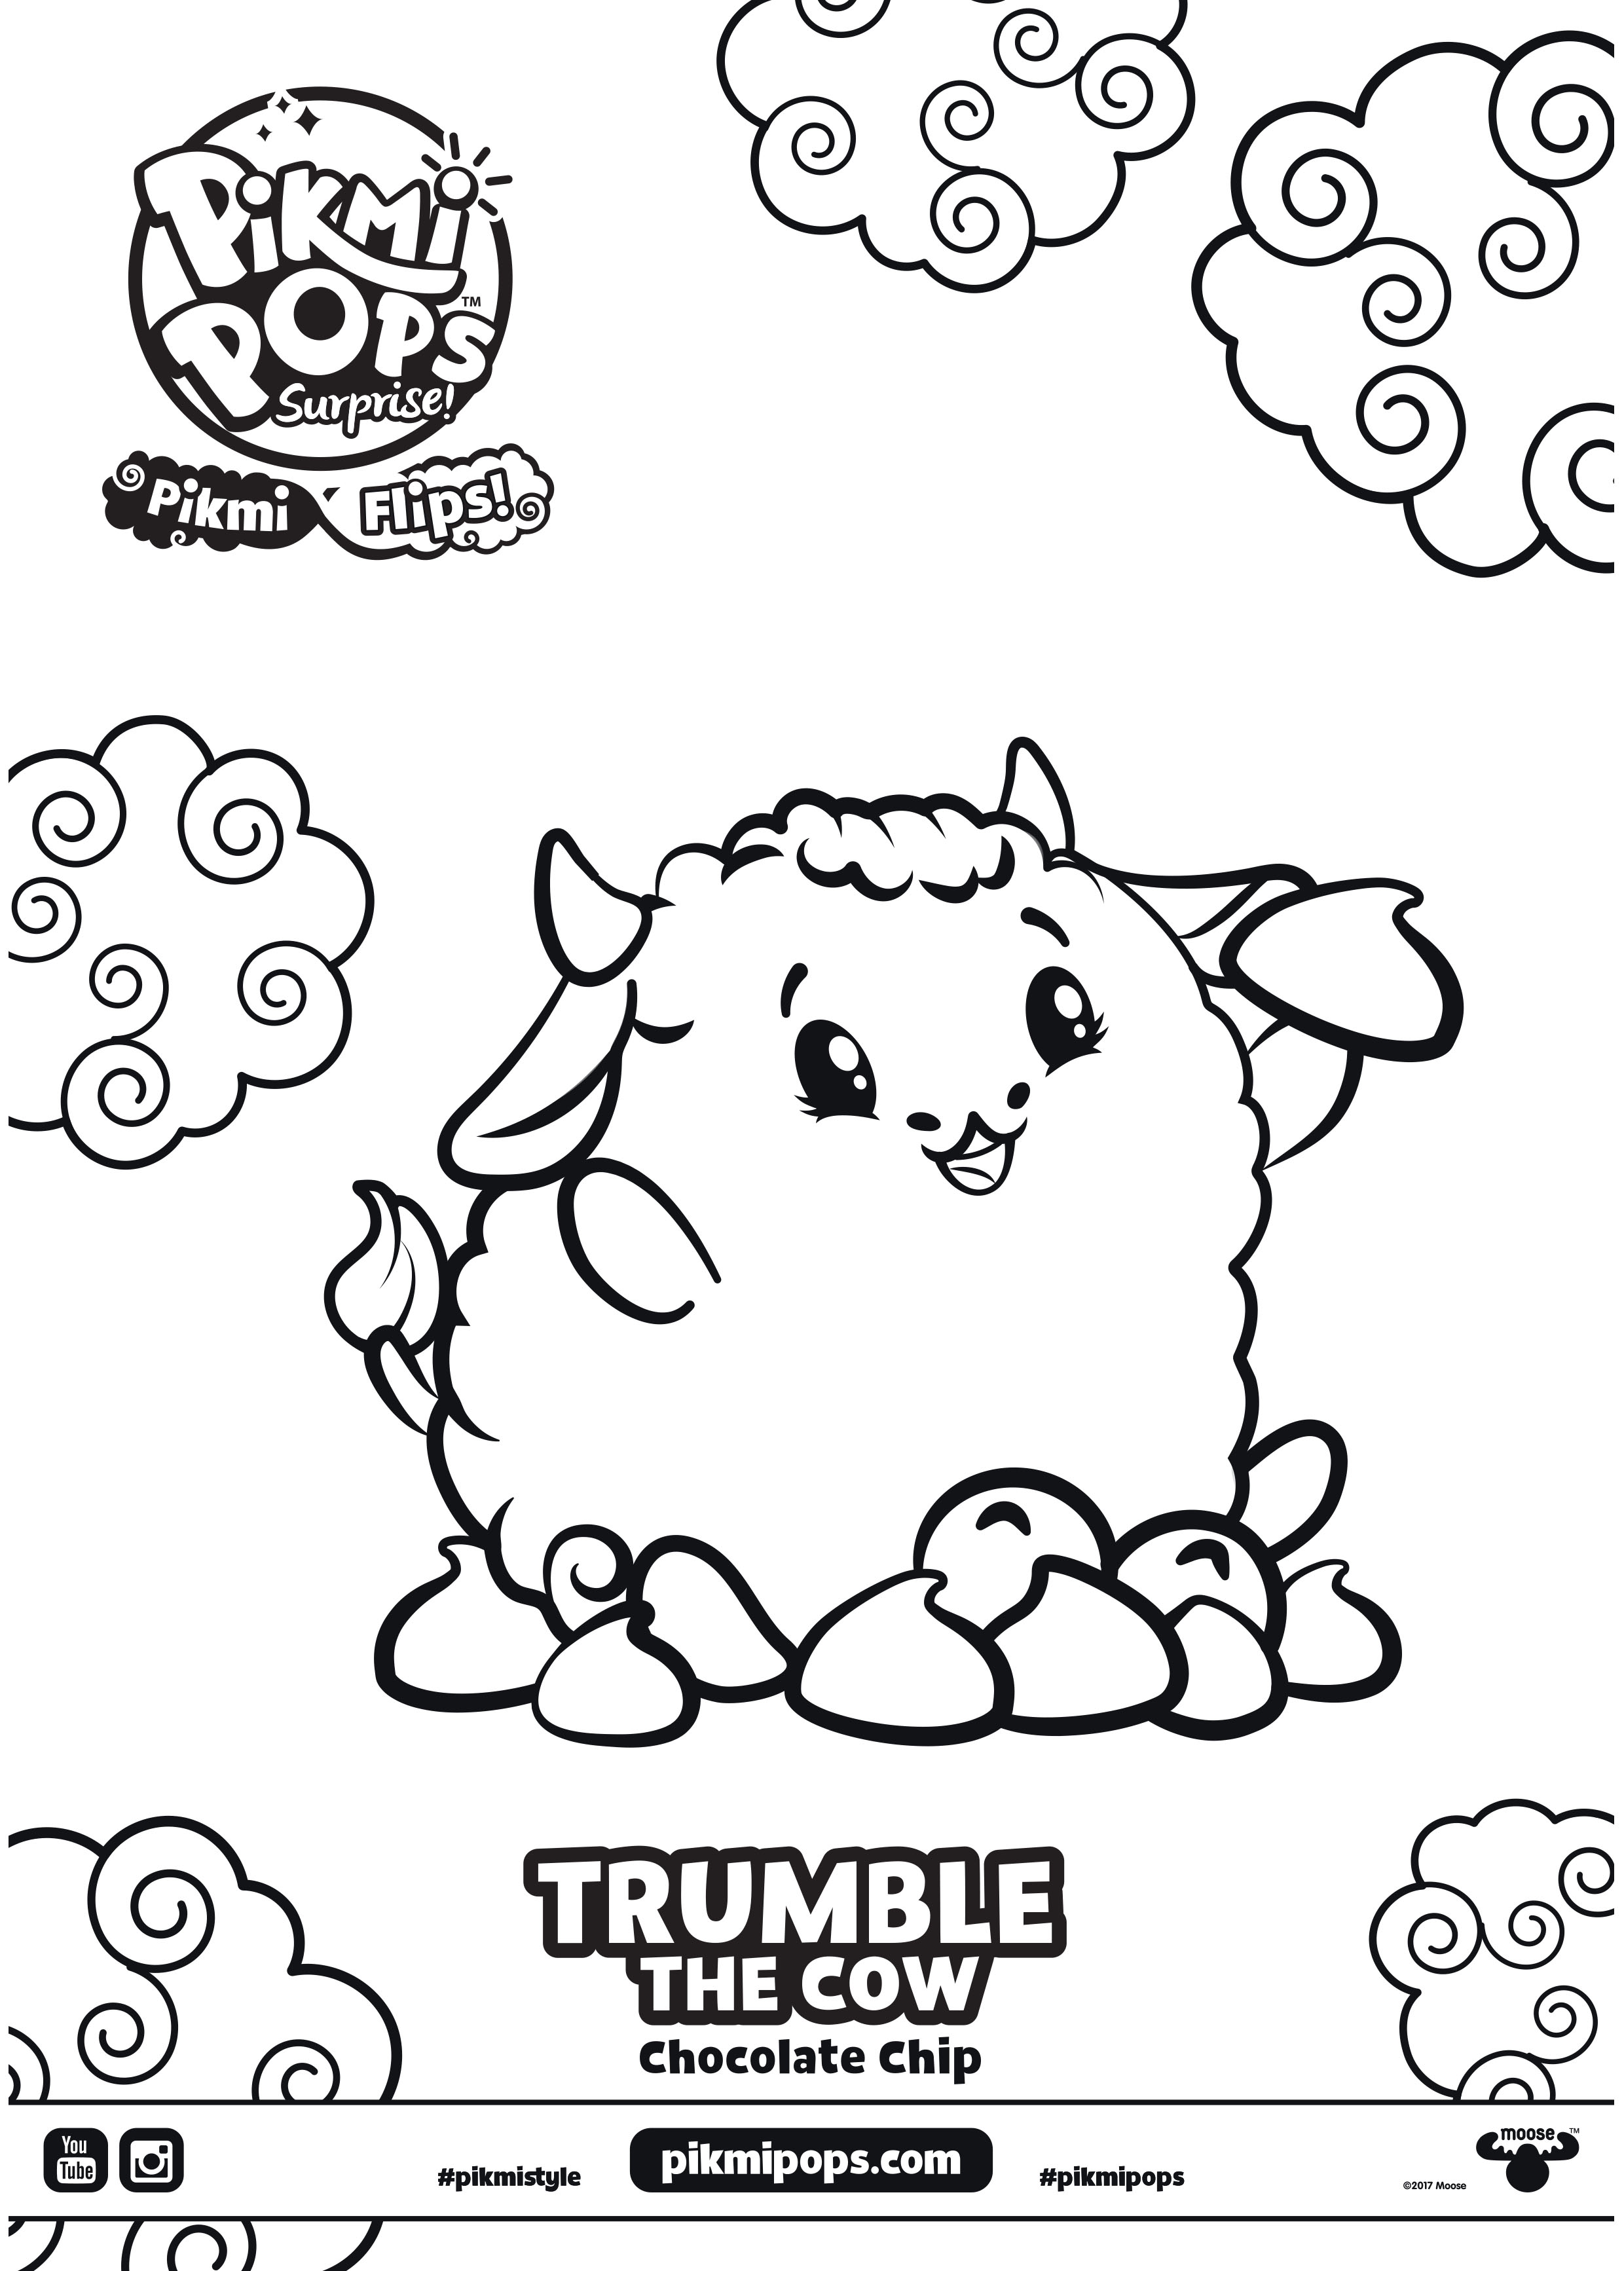 Download Fun Activities And Color Ins To Print Out And Play With Pikmi Pops Prima Toys